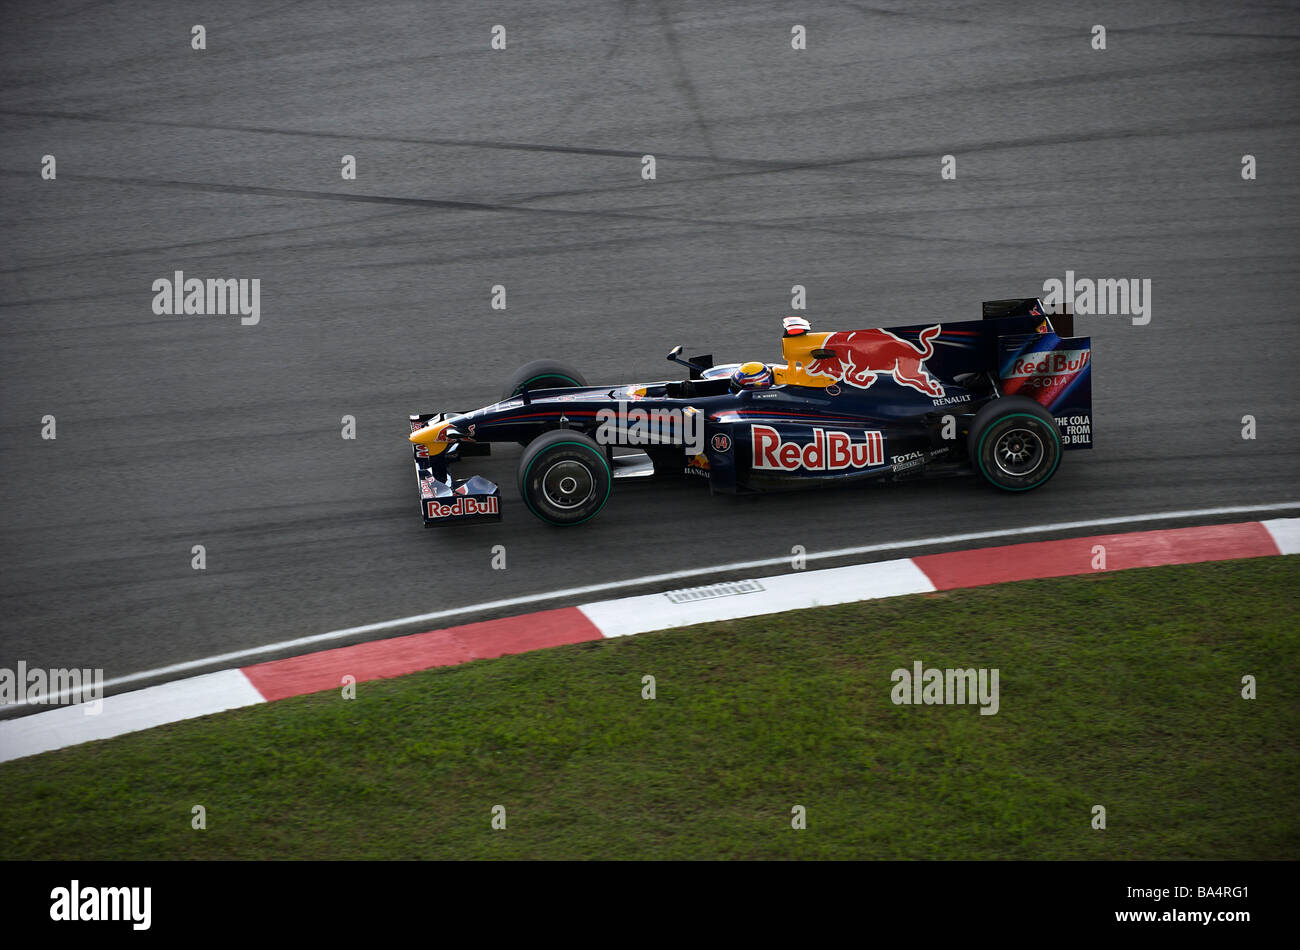 Red Bull Racing driver Mark Webber of Australia steers his car during the 2009 Fia Formula One Malasyan Grand Prix at the Sepang Stock Photo